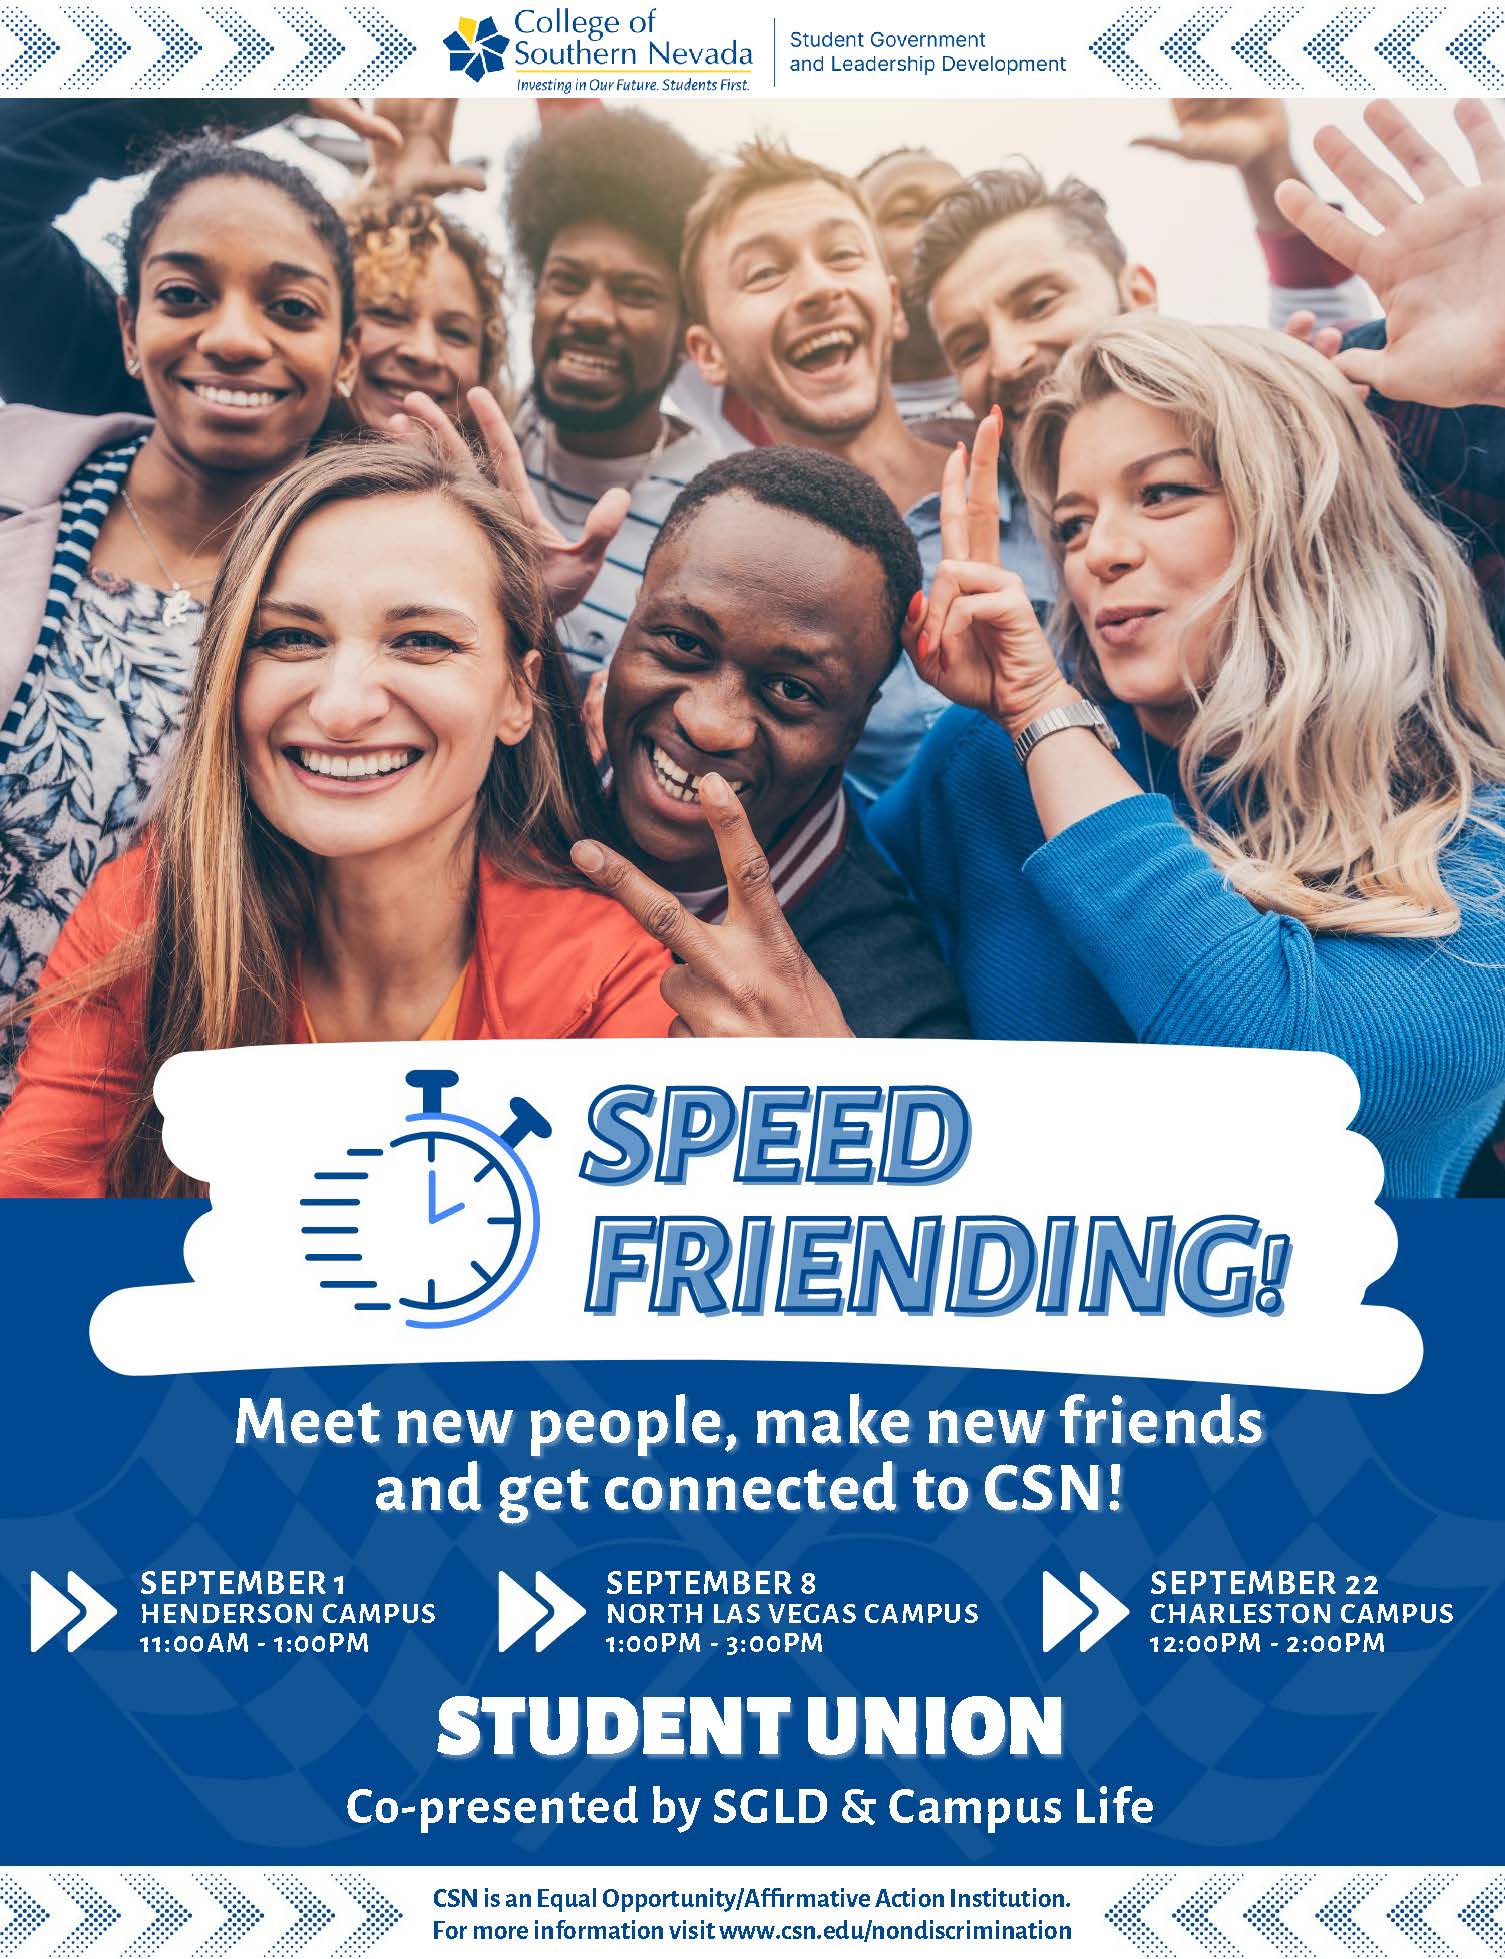 Student Government making friends event September 1, 8 and 22